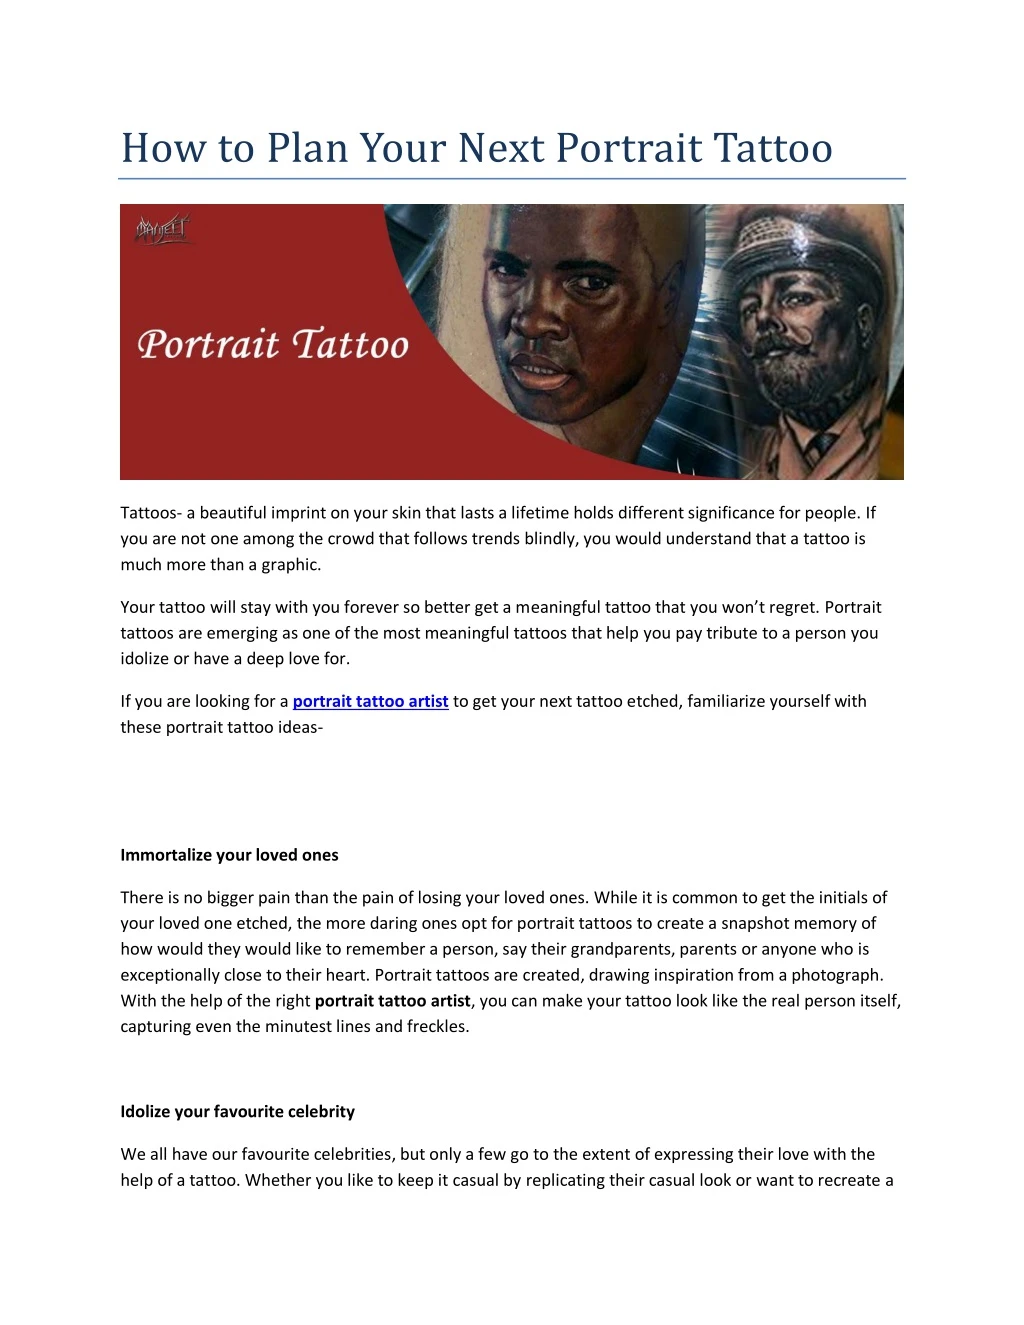 how to plan your next portrait tattoo